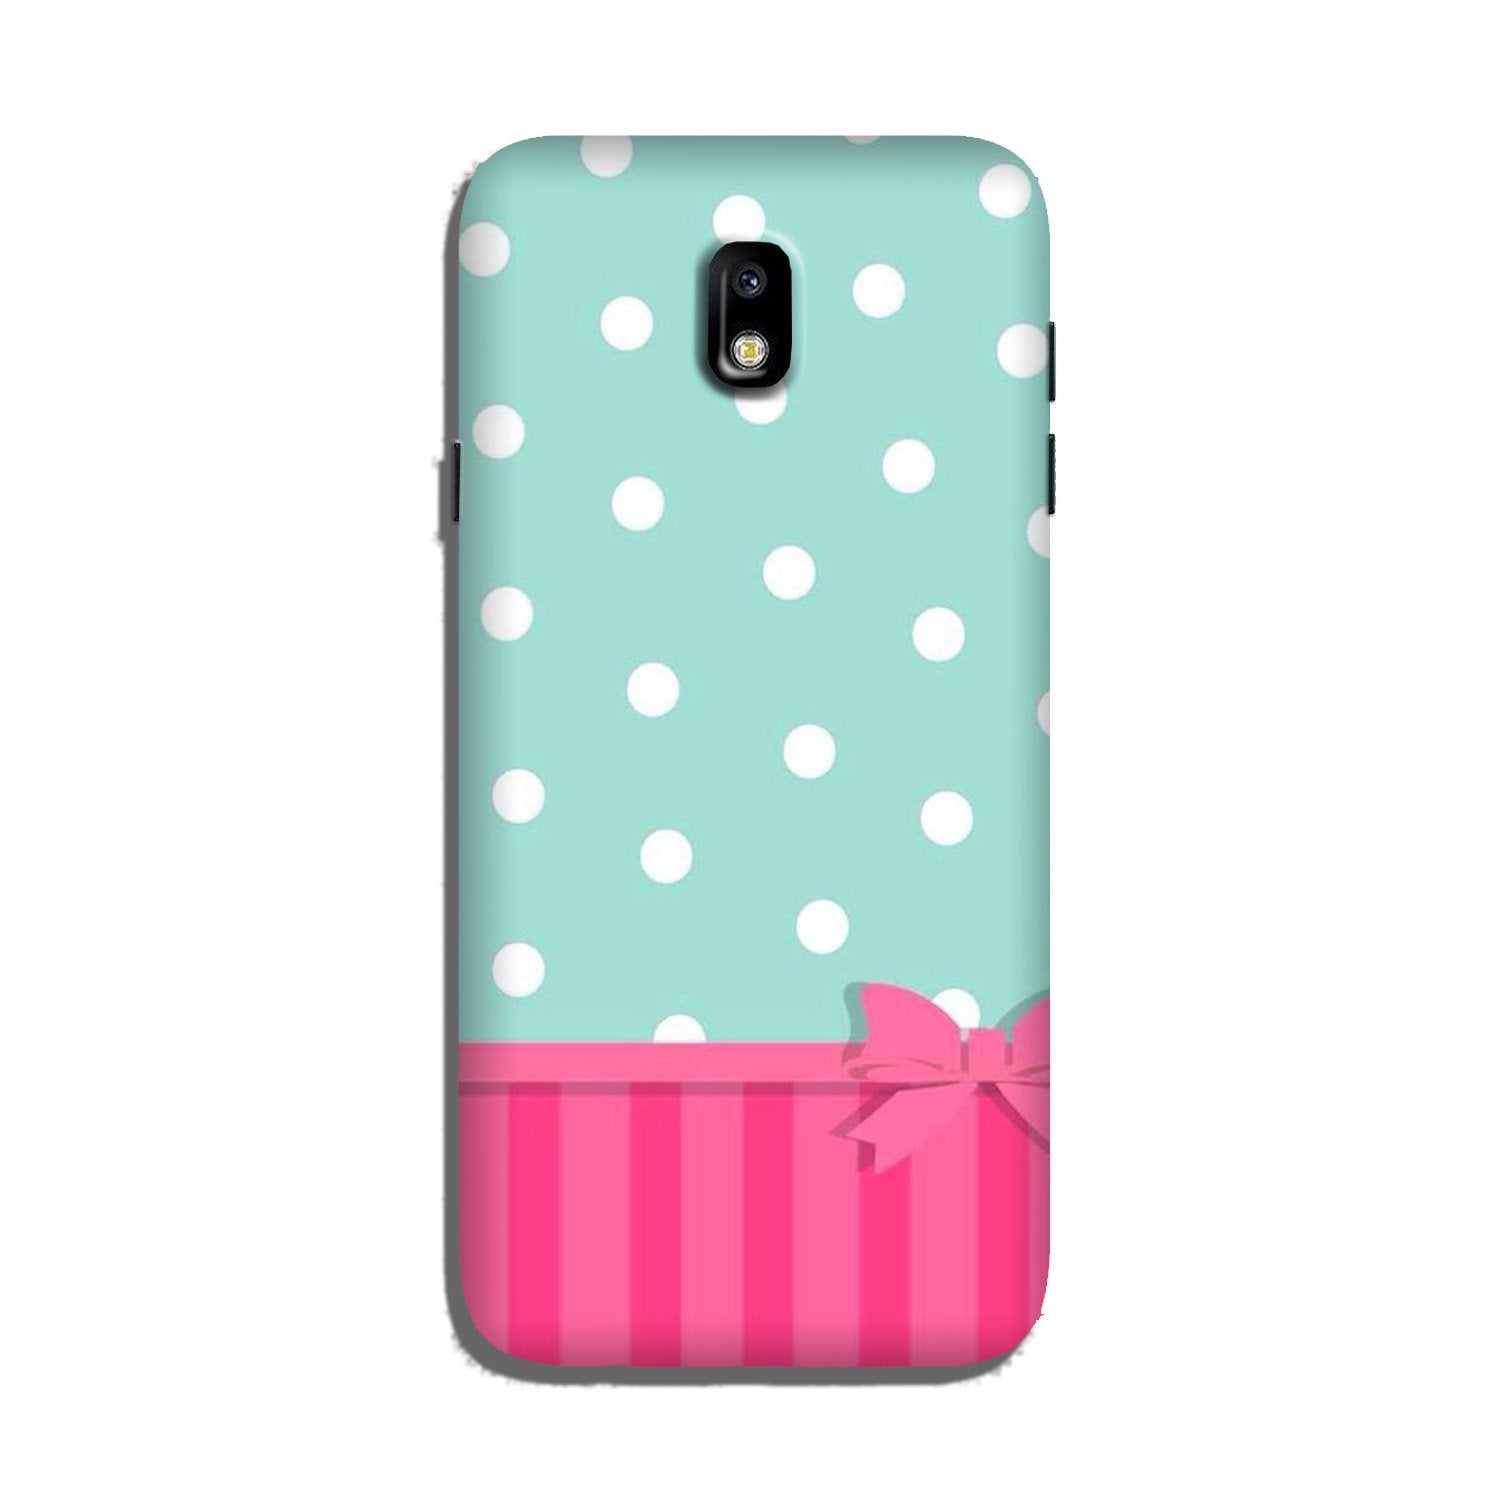 Gift Wrap Case for Galaxy J7 Pro